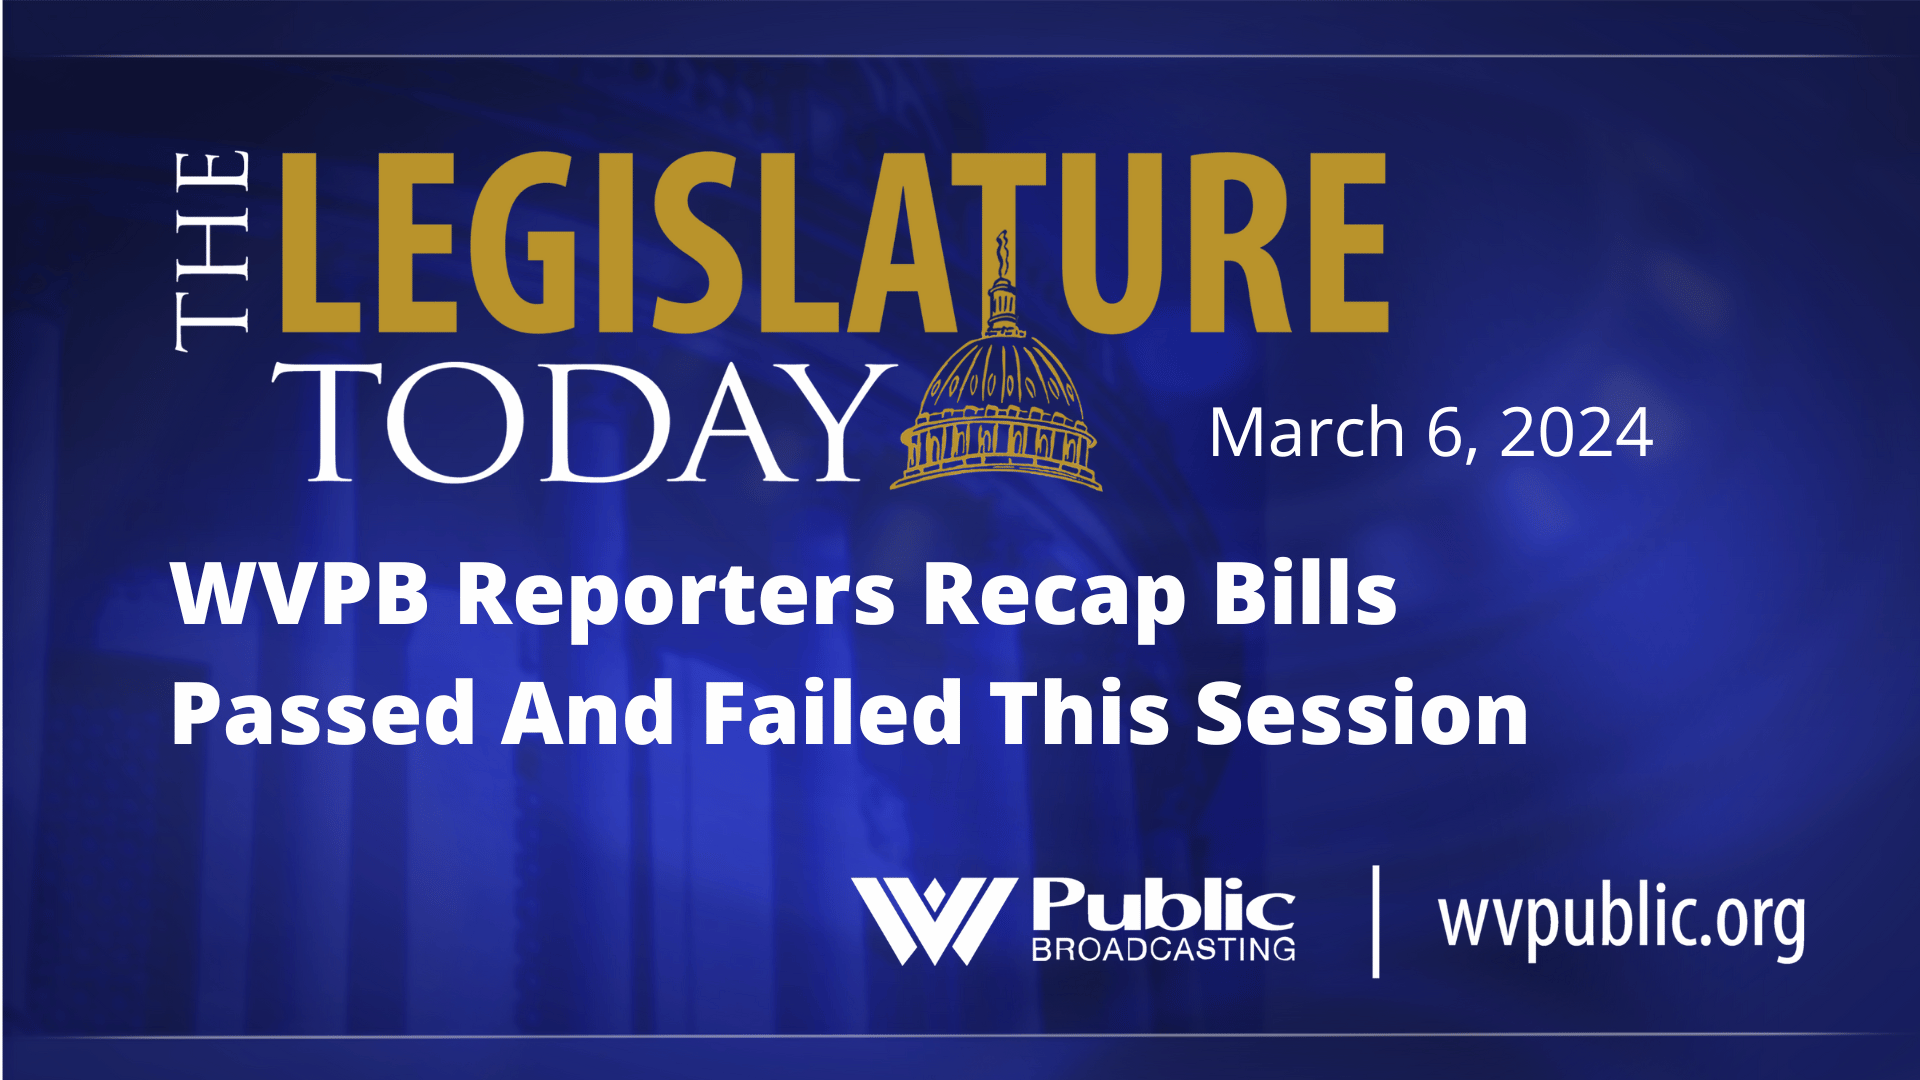 WVPB Reporters Recap Bills Passed And Failed This Session